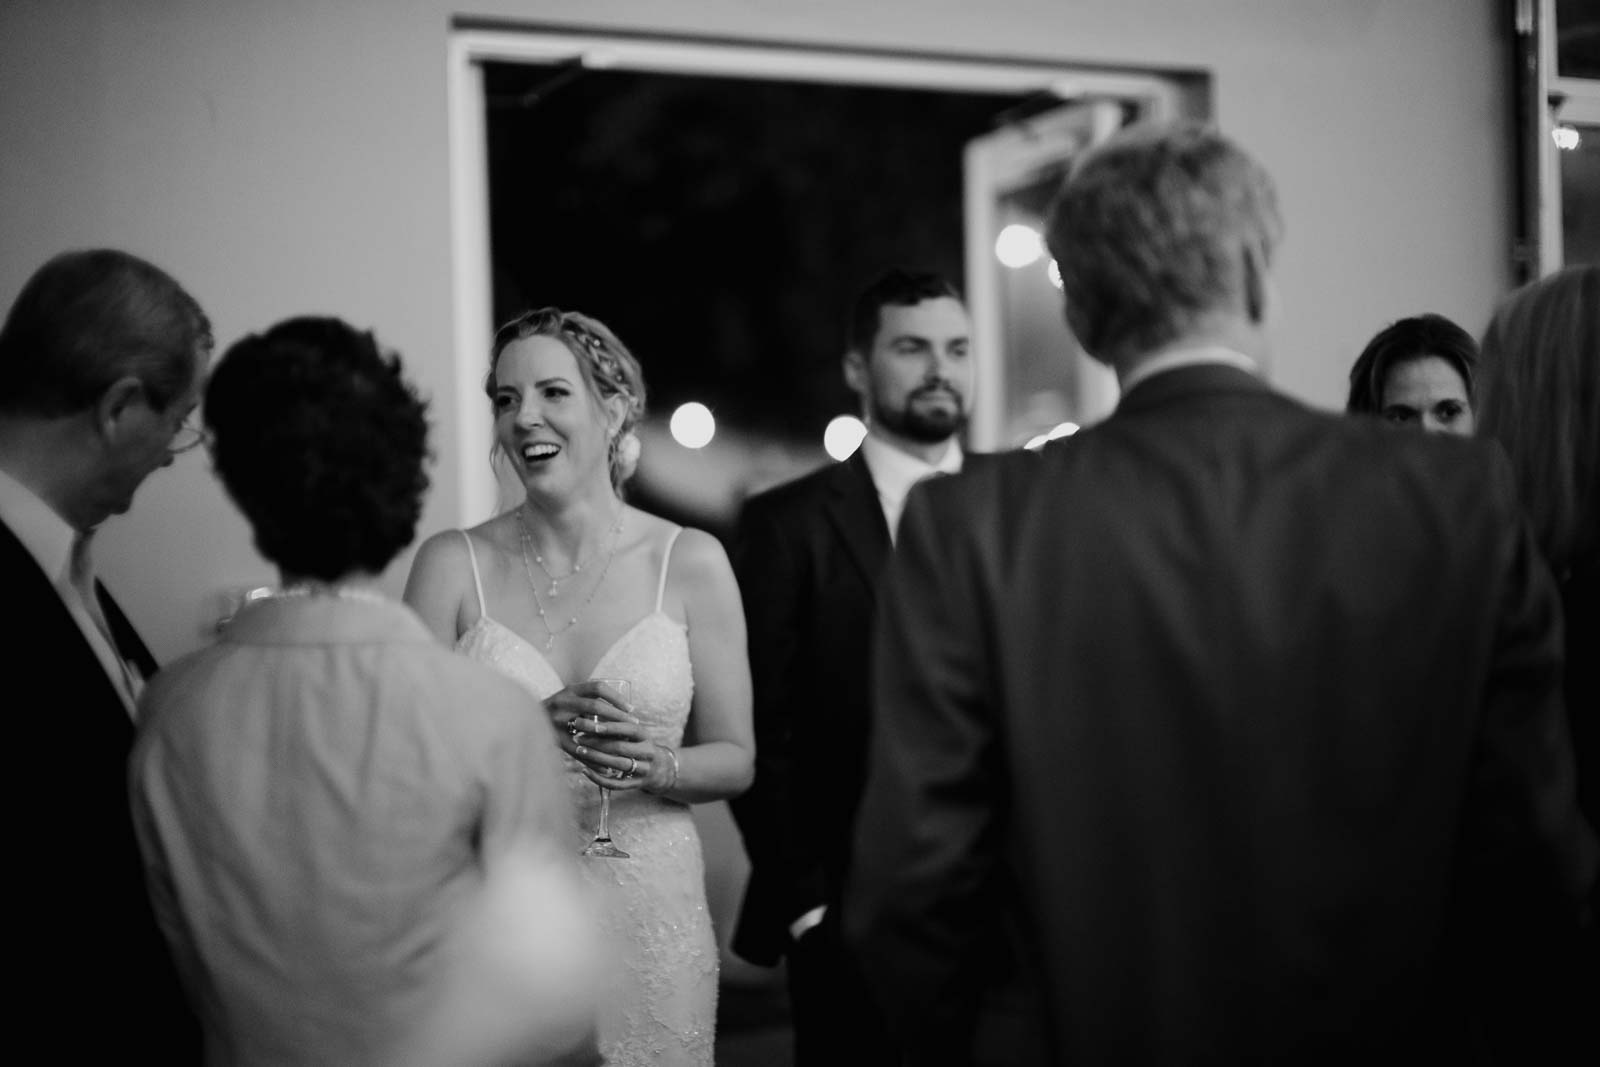 During the wedding reception a couple mingle with guests monochrome Leica photographer